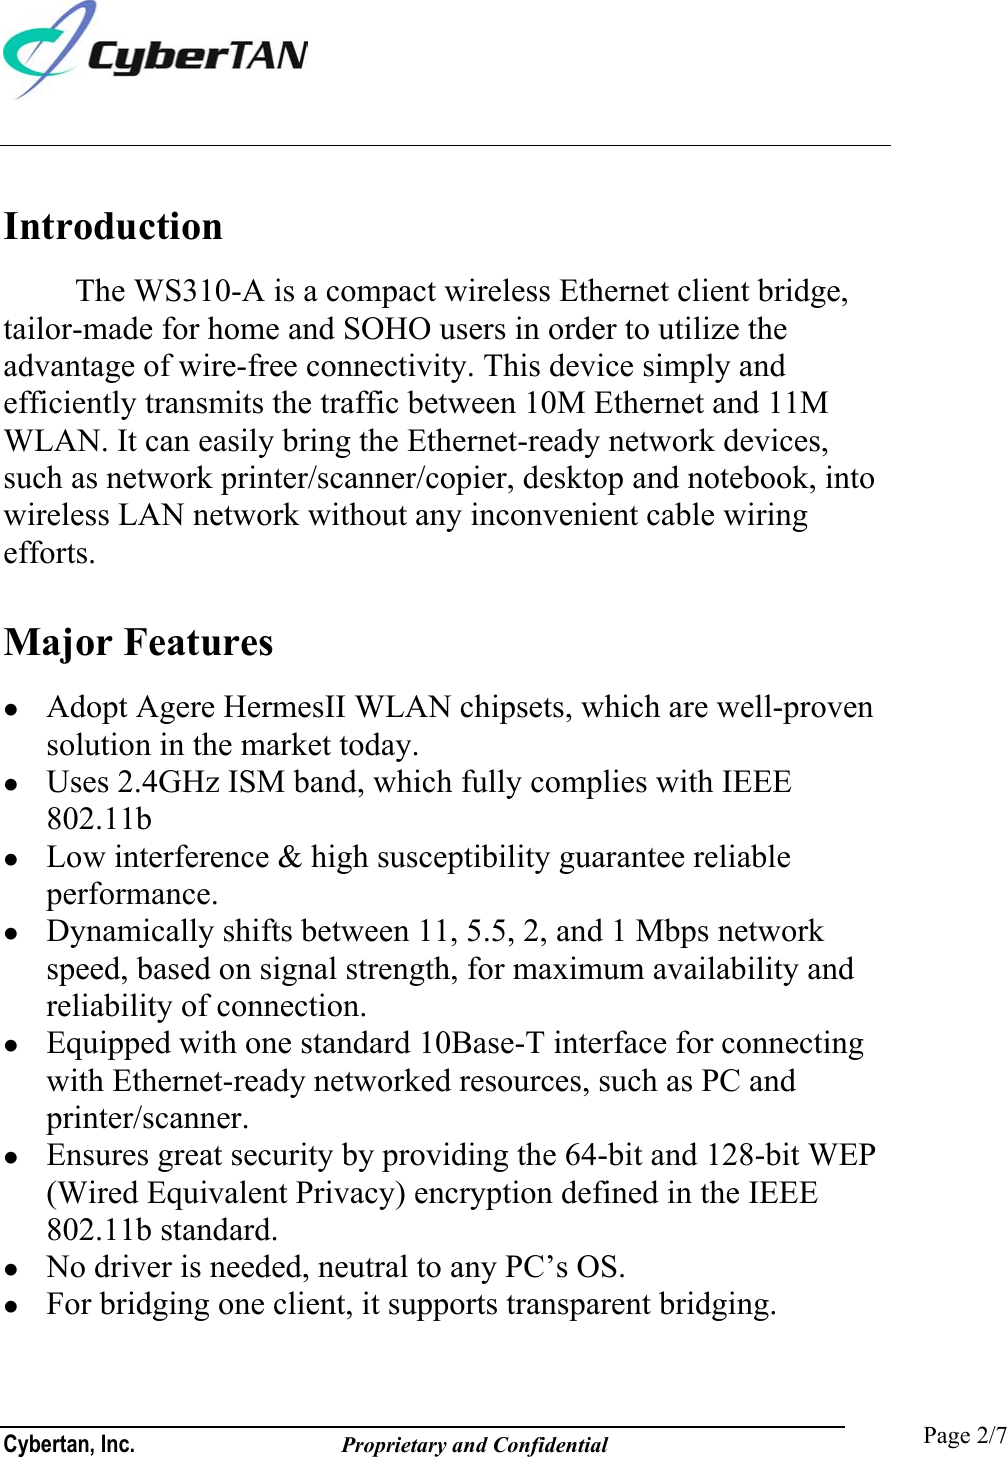  Cybertan, Inc.              Proprietary and Confidential   Page 2/7 Introduction The WS310-A is a compact wireless Ethernet client bridge, tailor-made for home and SOHO users in order to utilize the advantage of wire-free connectivity. This device simply and efficiently transmits the traffic between 10M Ethernet and 11M WLAN. It can easily bring the Ethernet-ready network devices, such as network printer/scanner/copier, desktop and notebook, into wireless LAN network without any inconvenient cable wiring efforts.    Major Features   Adopt Agere HermesII WLAN chipsets, which are well-proven solution in the market today.   Uses 2.4GHz ISM band, which fully complies with IEEE 802.11b    Low interference &amp; high susceptibility guarantee reliable performance.   Dynamically shifts between 11, 5.5, 2, and 1 Mbps network speed, based on signal strength, for maximum availability and reliability of connection.   Equipped with one standard 10Base-T interface for connecting with Ethernet-ready networked resources, such as PC and printer/scanner.   Ensures great security by providing the 64-bit and 128-bit WEP (Wired Equivalent Privacy) encryption defined in the IEEE 802.11b standard.   No driver is needed, neutral to any PC’s OS.   For bridging one client, it supports transparent bridging. 